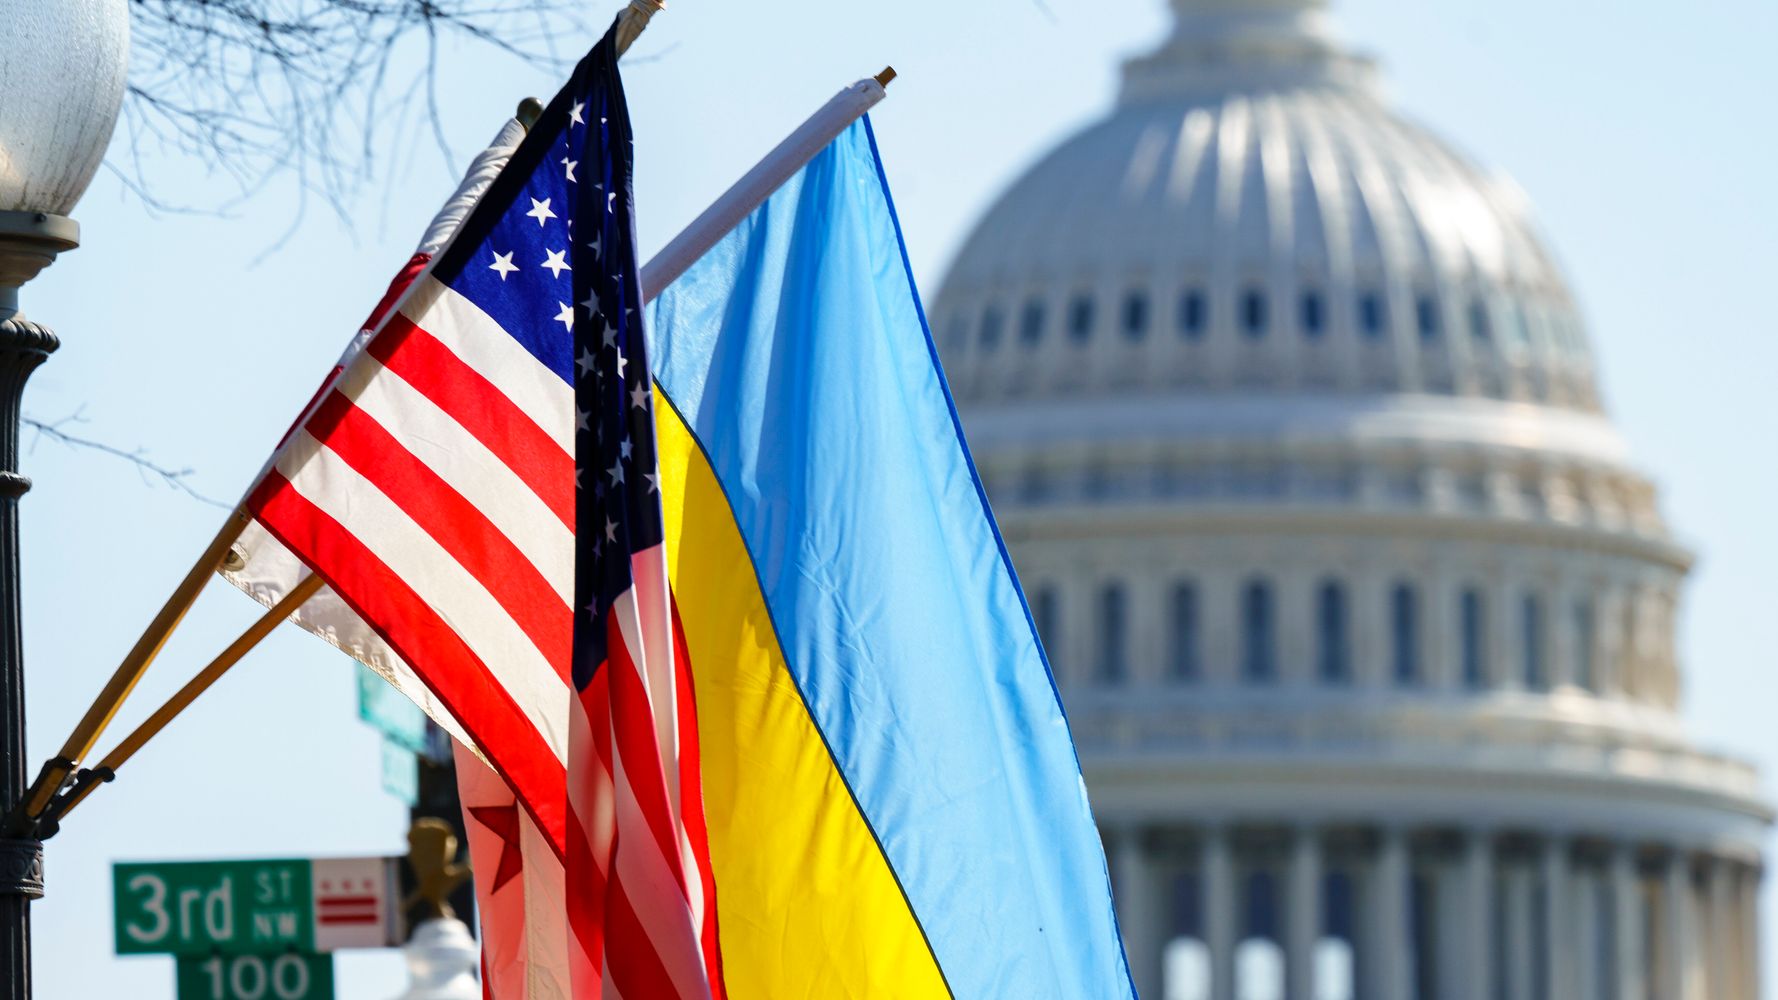 U.S. Diplomats Return To Ukraine, Hope To Reopen Kyiv Embassy 'As Soon As Possible'